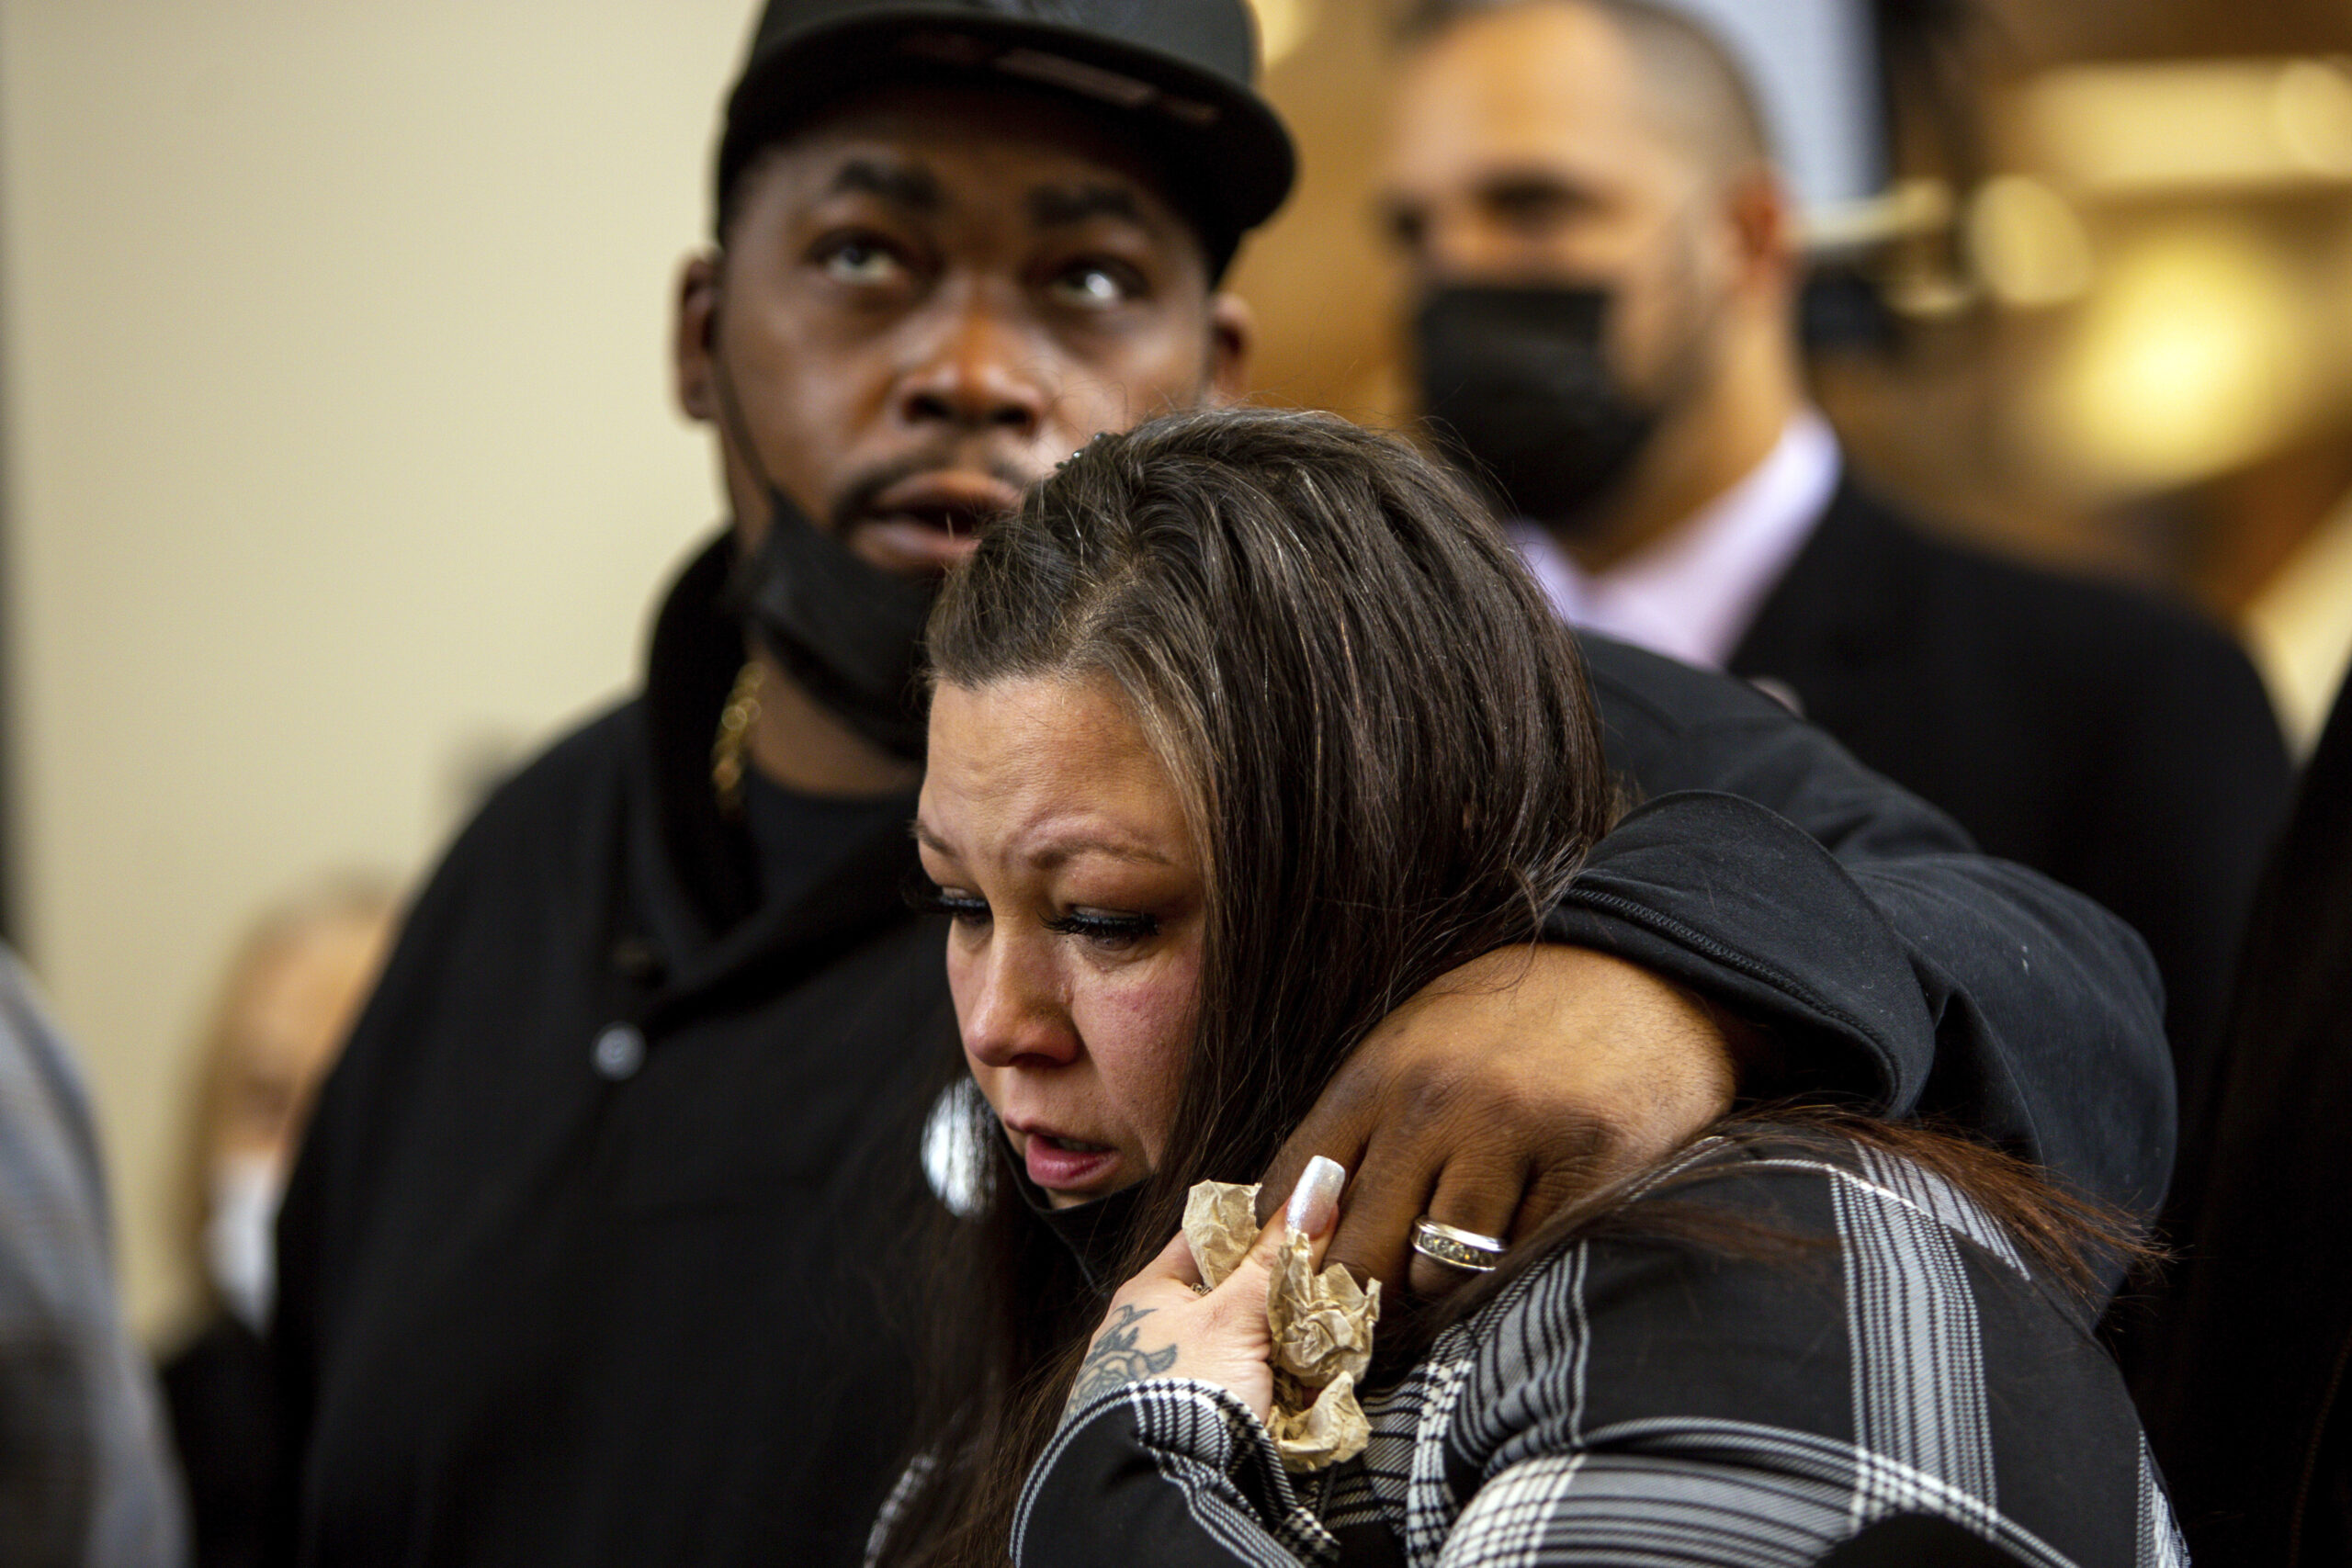 Daunte Wright's parents, Aubrey Wright and Katie Wright, react after former Brooklyn Center Police Officer Kim Potter was sentenced to two years in prison, Friday, Feb. 18, 2022 in Minneapolis. Potter was convicted in December of both first-degree and second-degree manslaughter in the April 11 killing of Wright, a 20-year-old Black motorist. (AP Photo/Nicole Neri )